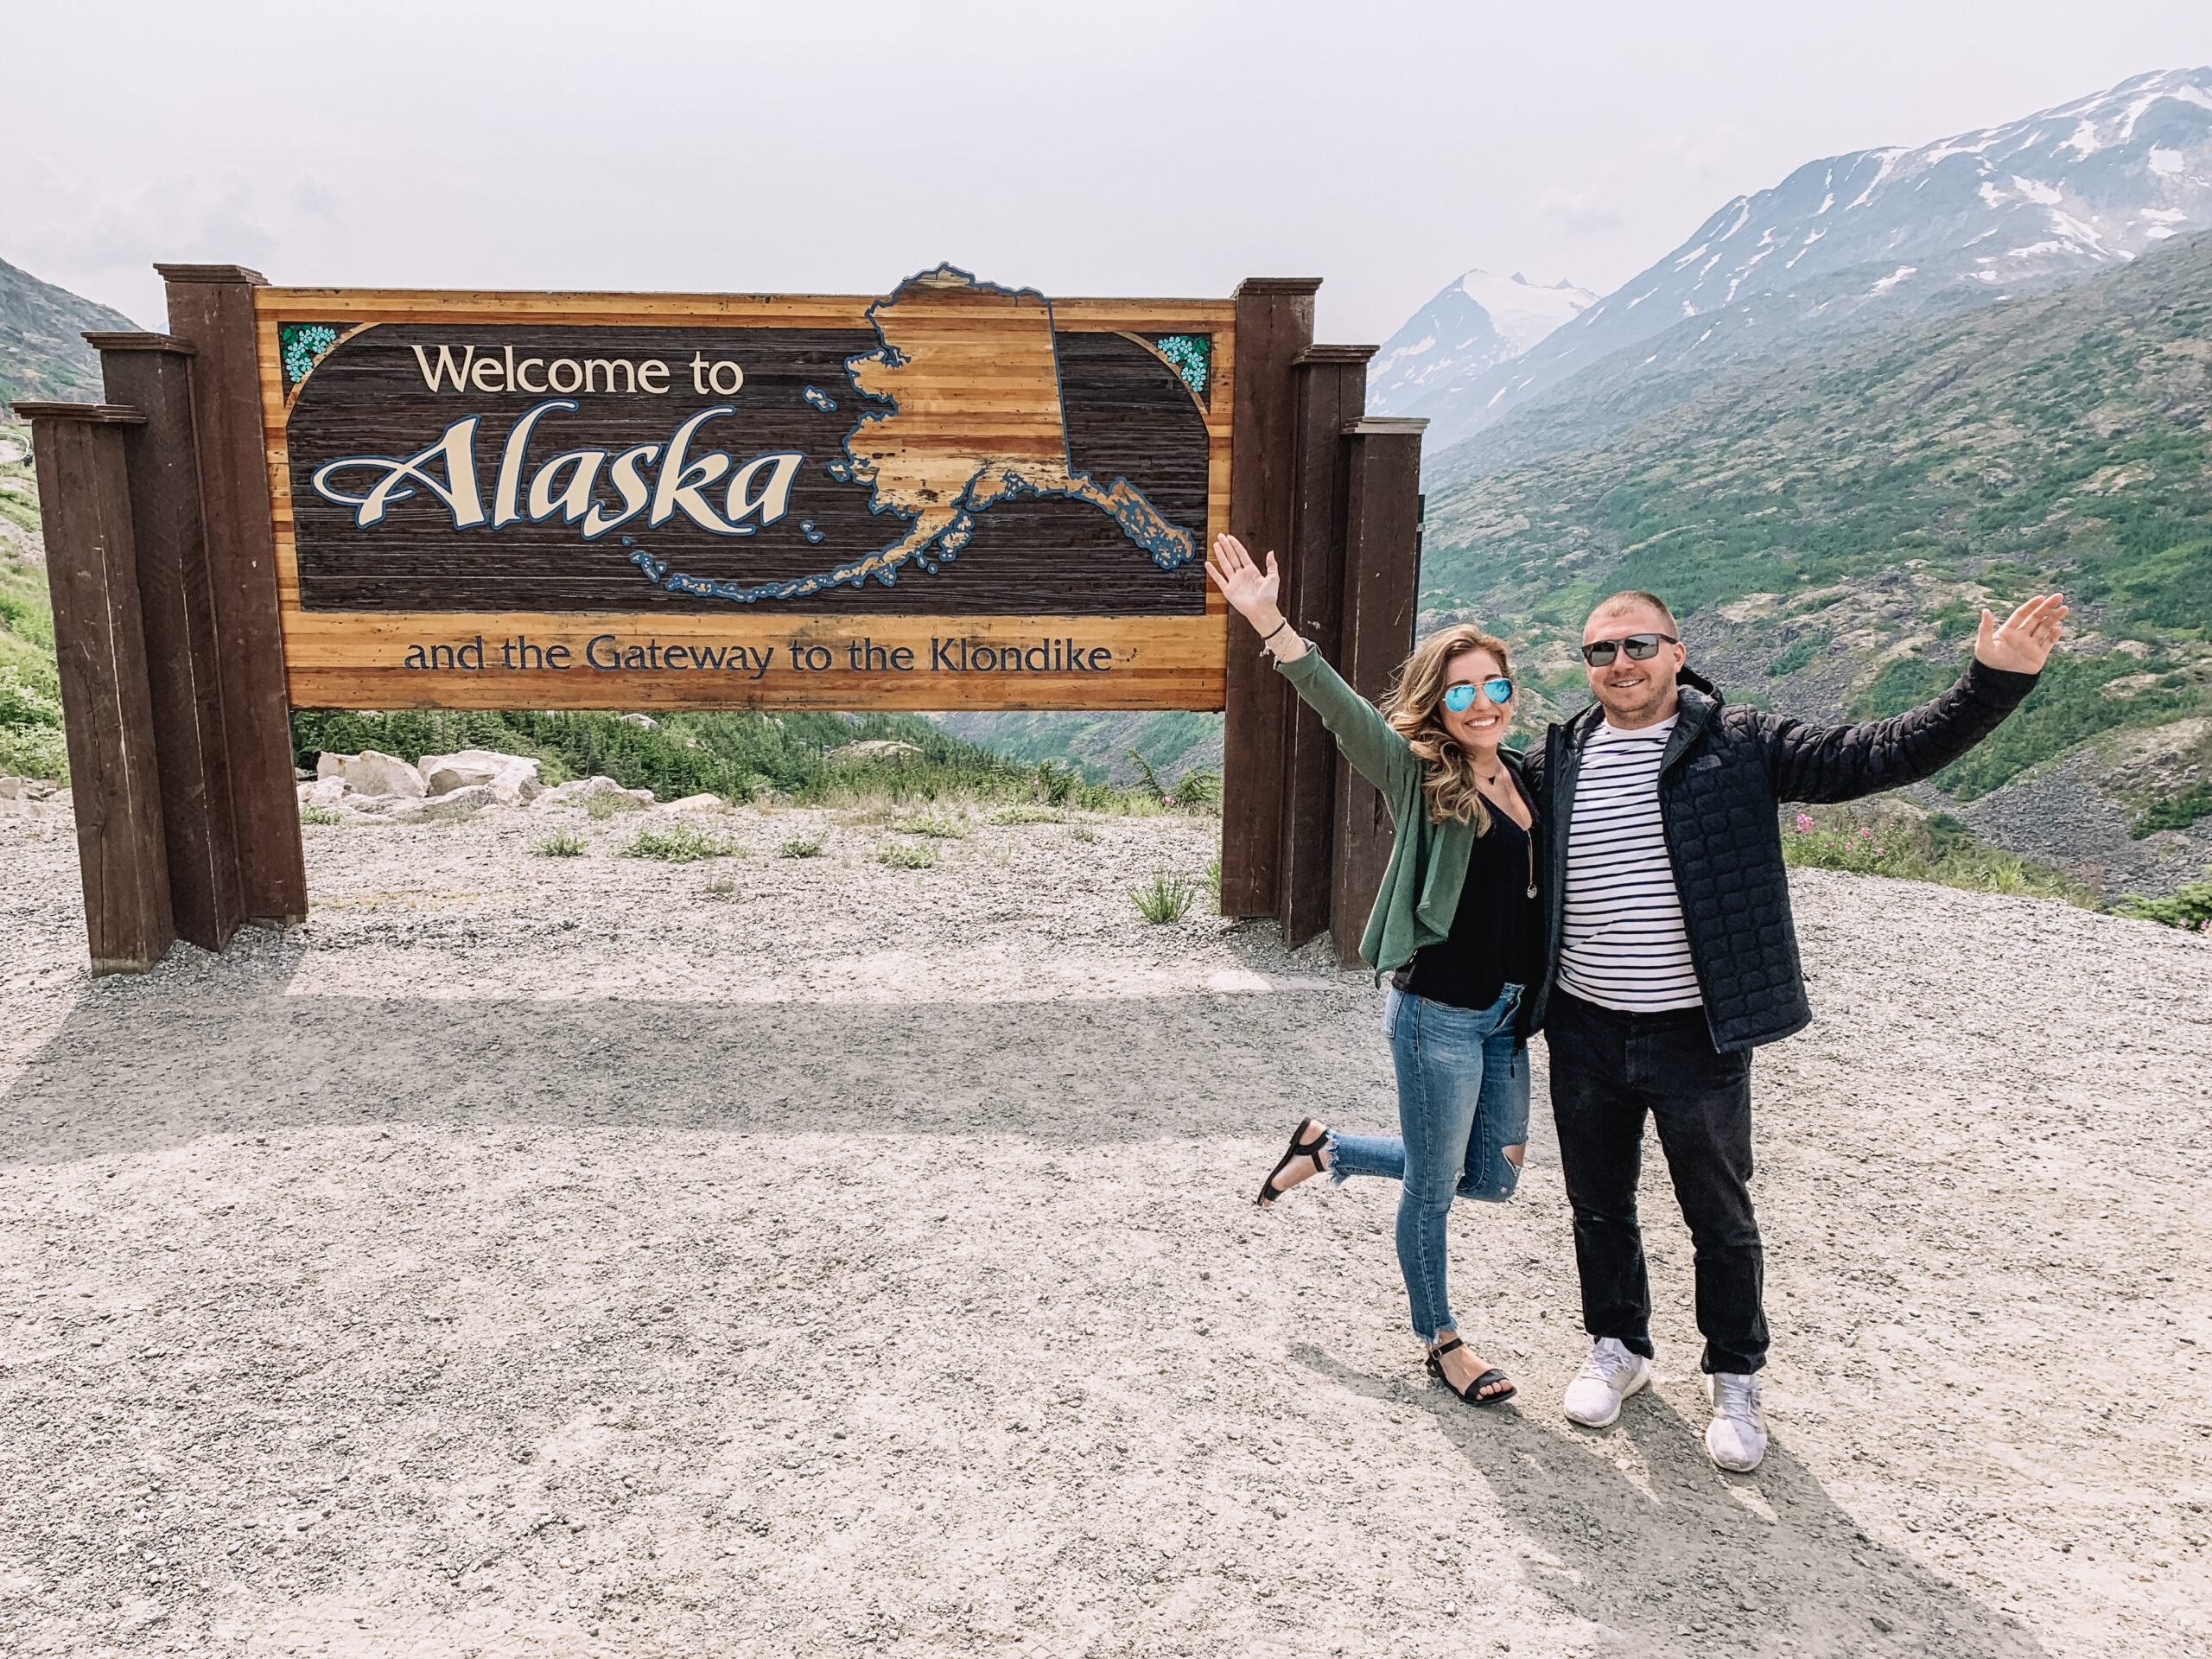 7 THINGS TO DO IN ALASKA IN THE SUMMER